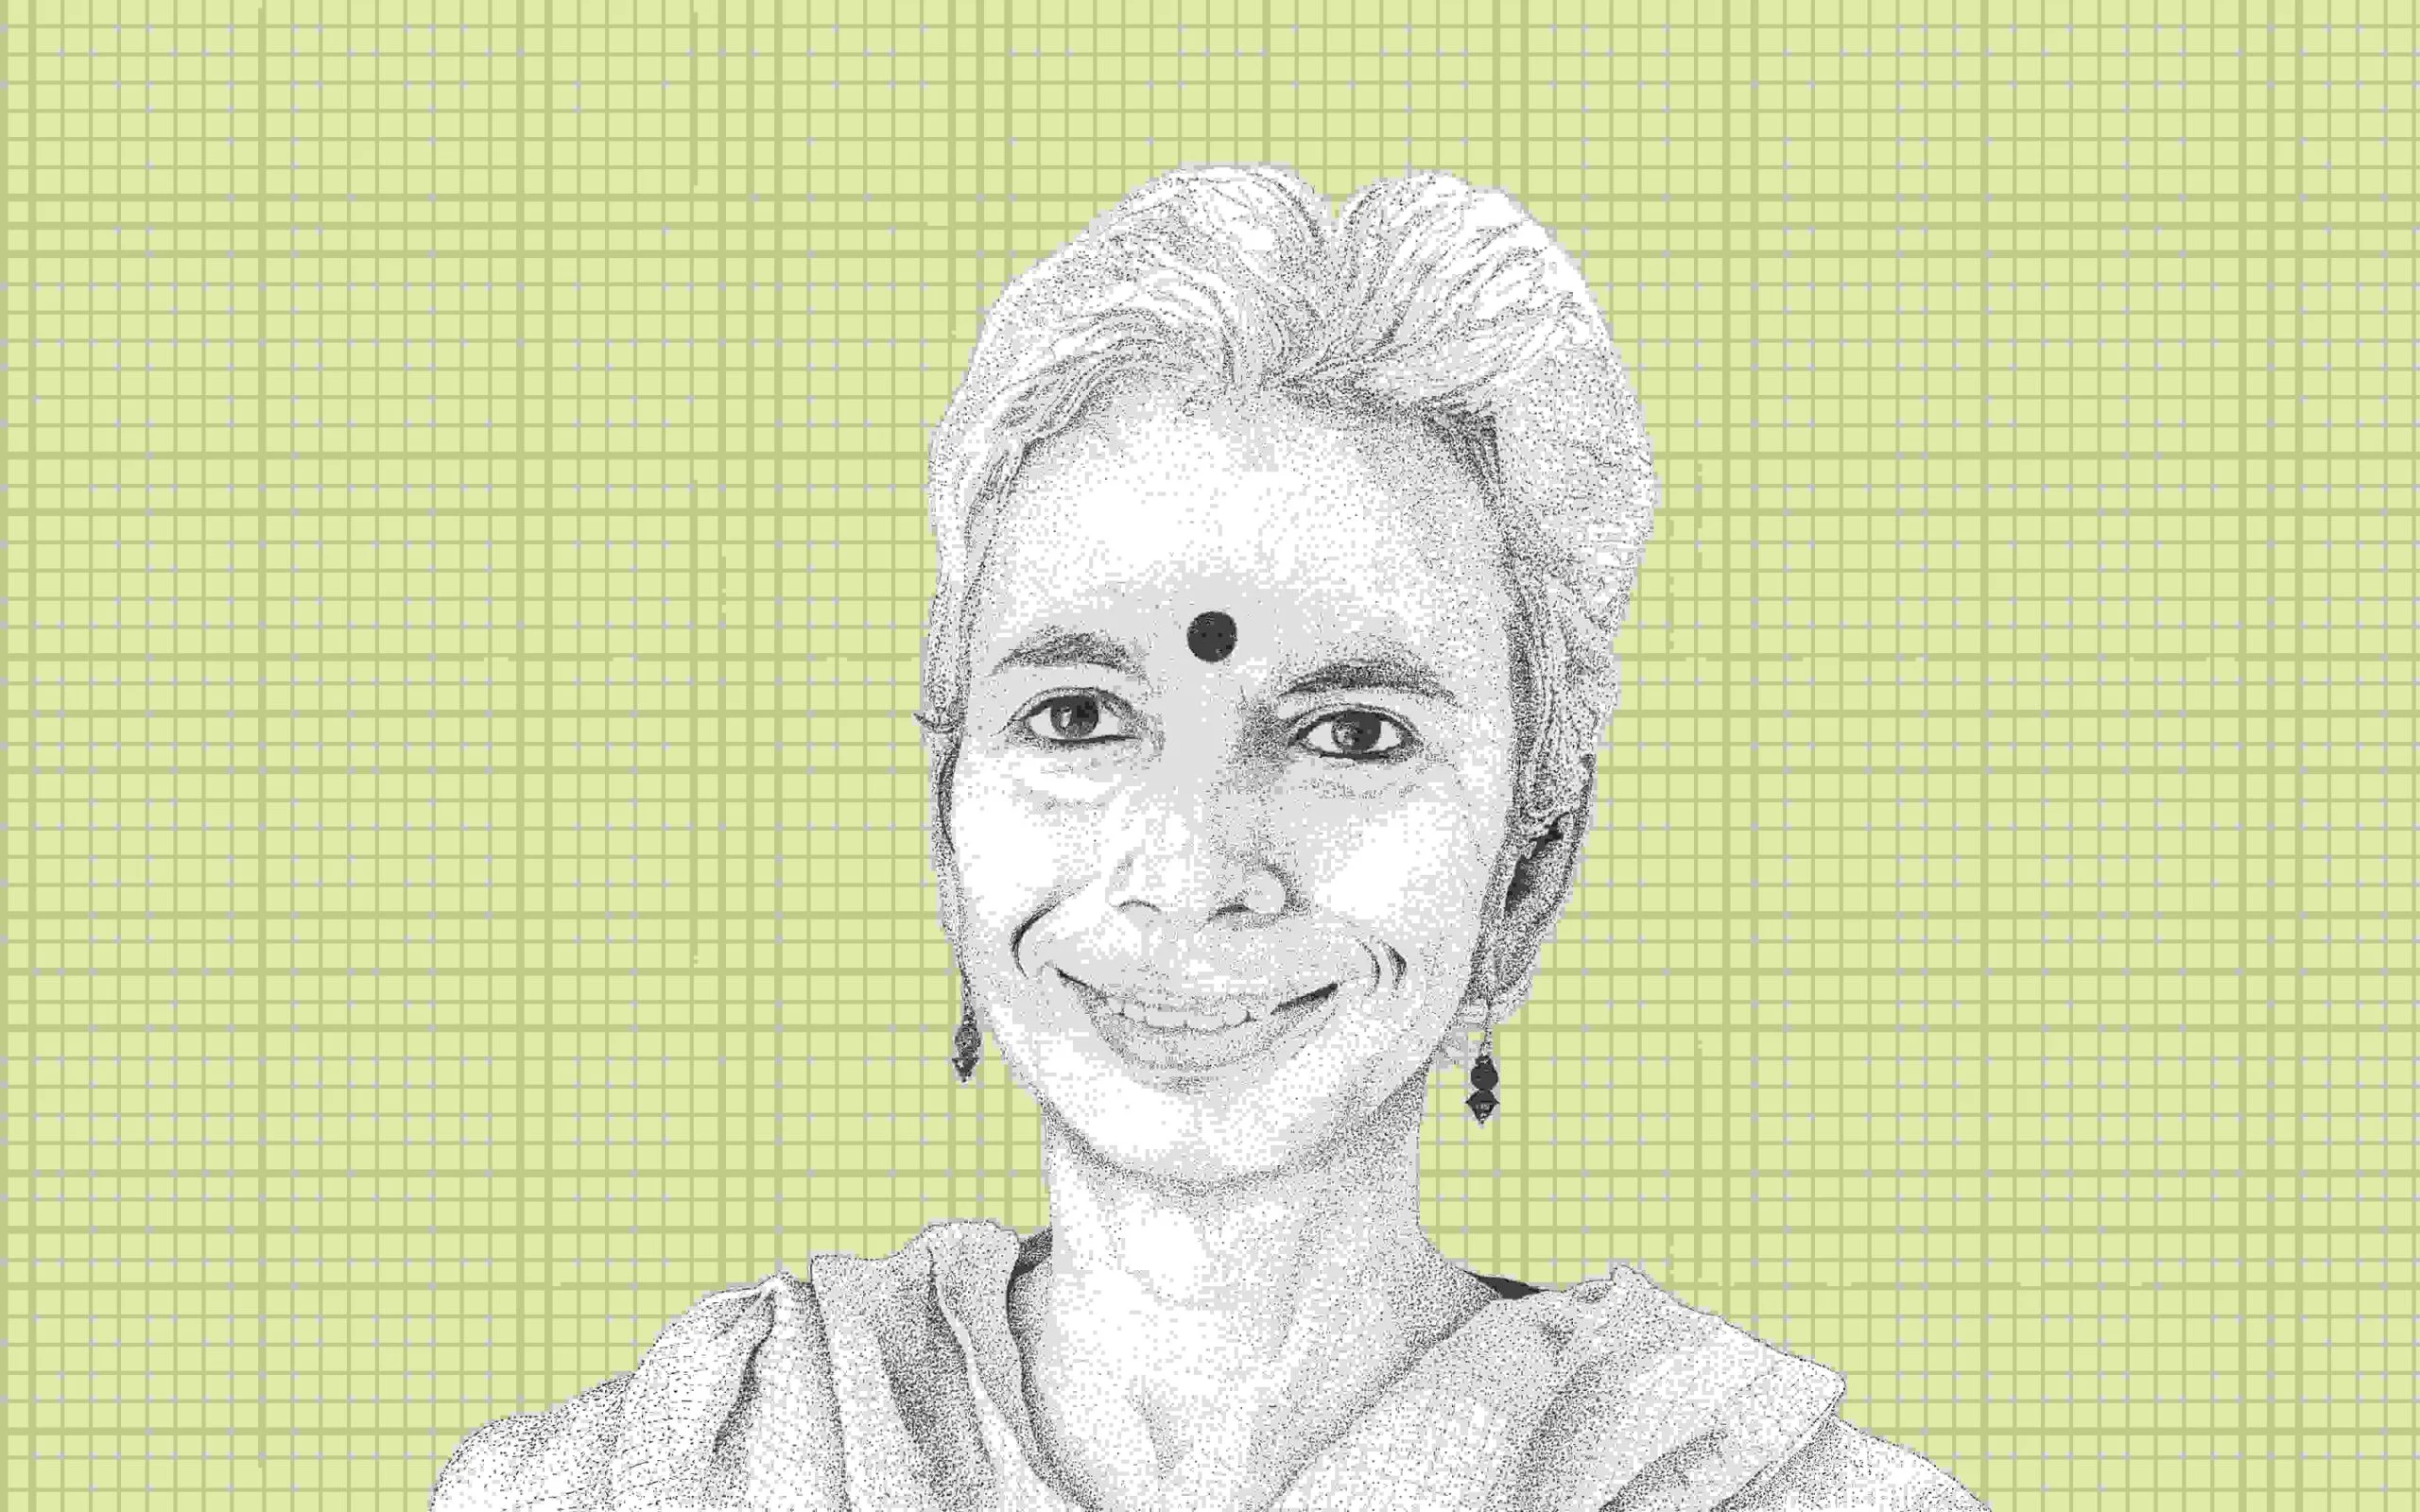 Illustration of Sushma Iyengar, a social activist and founder of Kutch Mahila Vikas Sangathan (KMVS), an organisation that seeks to empower women to become capable and confident decision-making partners in their village, community, and regional development initiatives. - women's empowerment